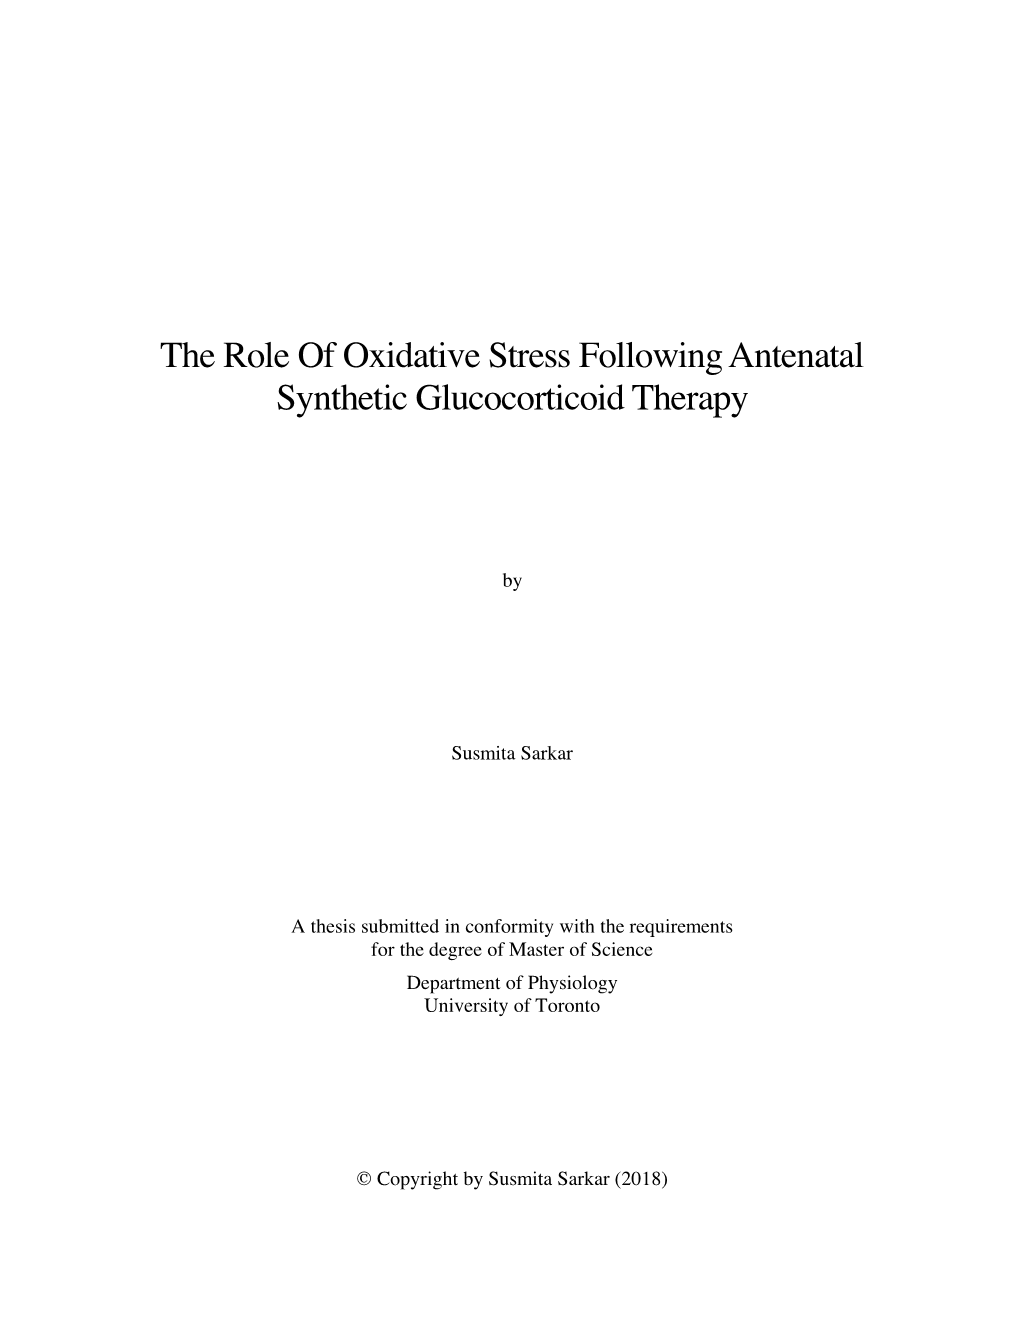 The Role of Oxidative Stress Following Antenatal Synthetic Glucocorticoid Therapy